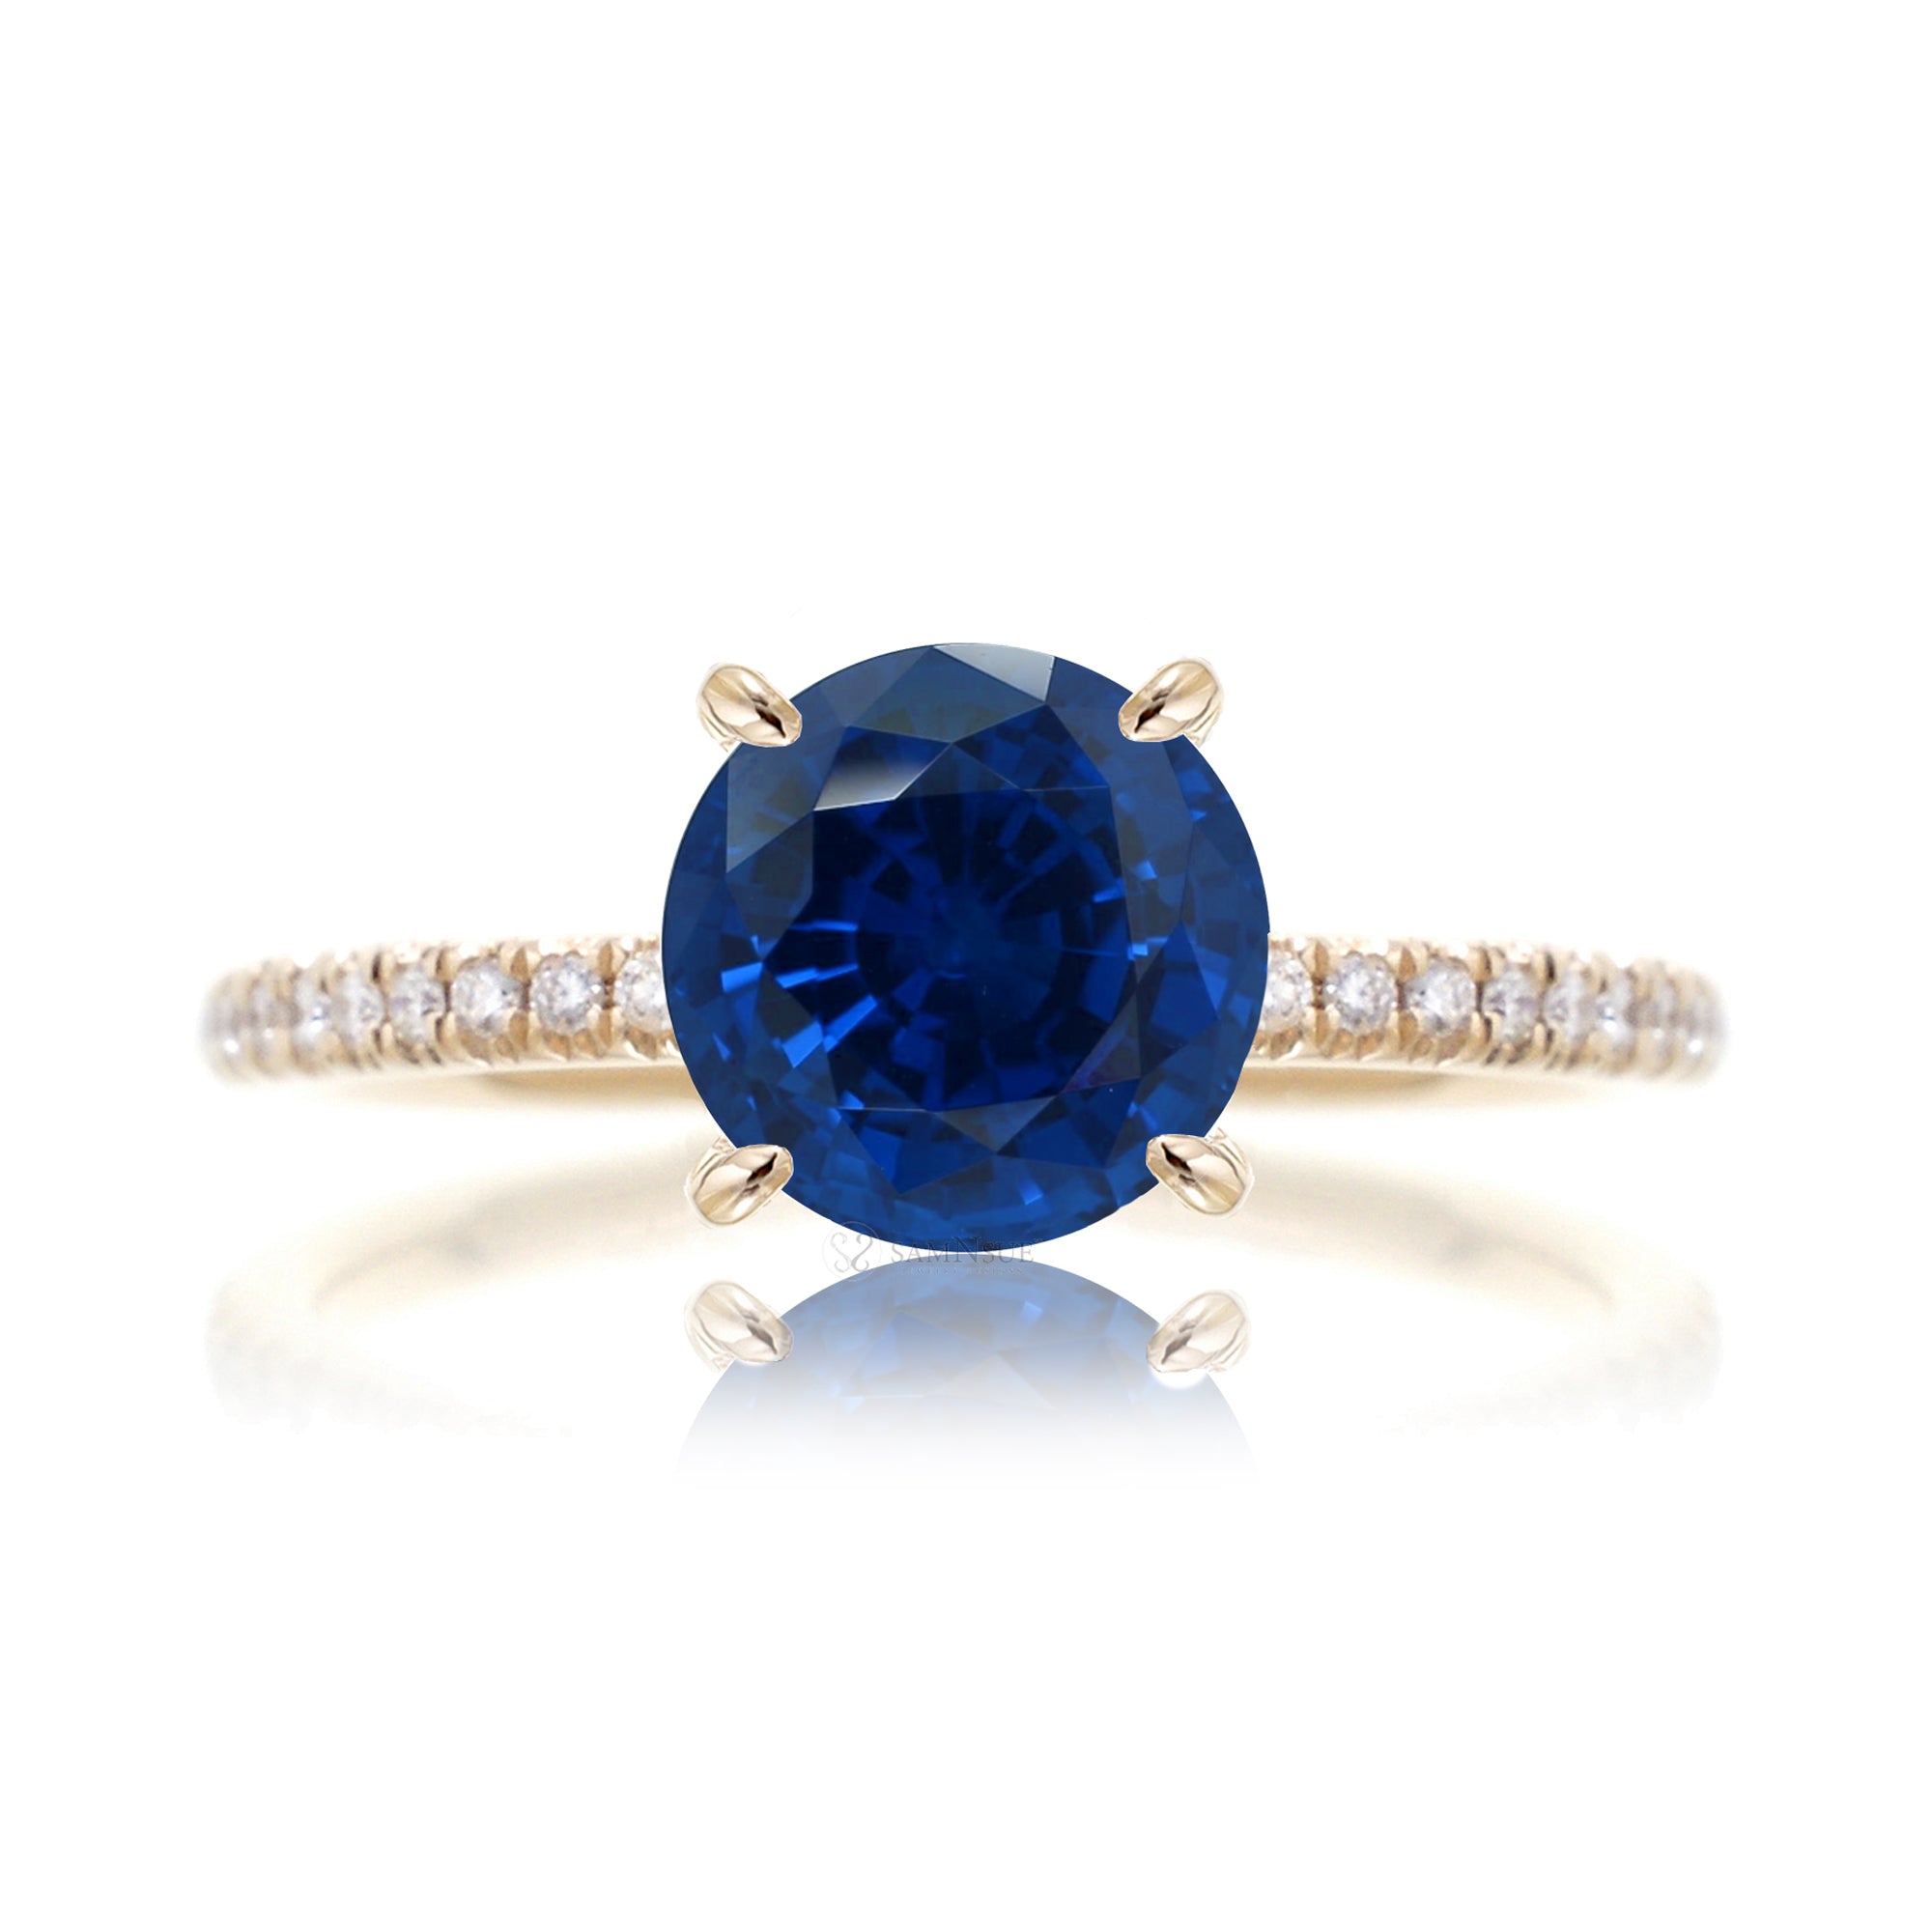 Round blue sapphire diamond band engagement ring yellow gold - the Ava